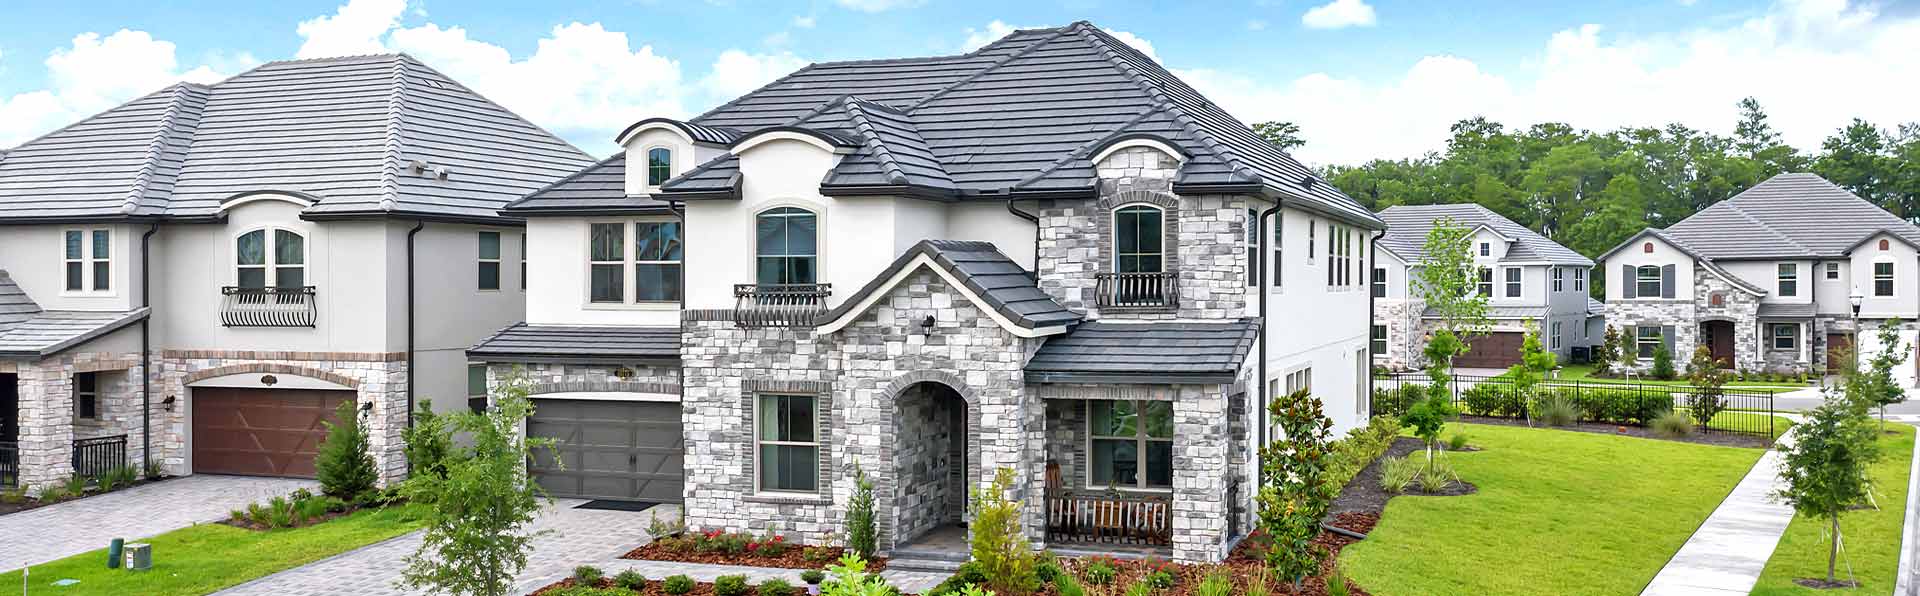 Two Story Orlando Home with Gray Tile Roof